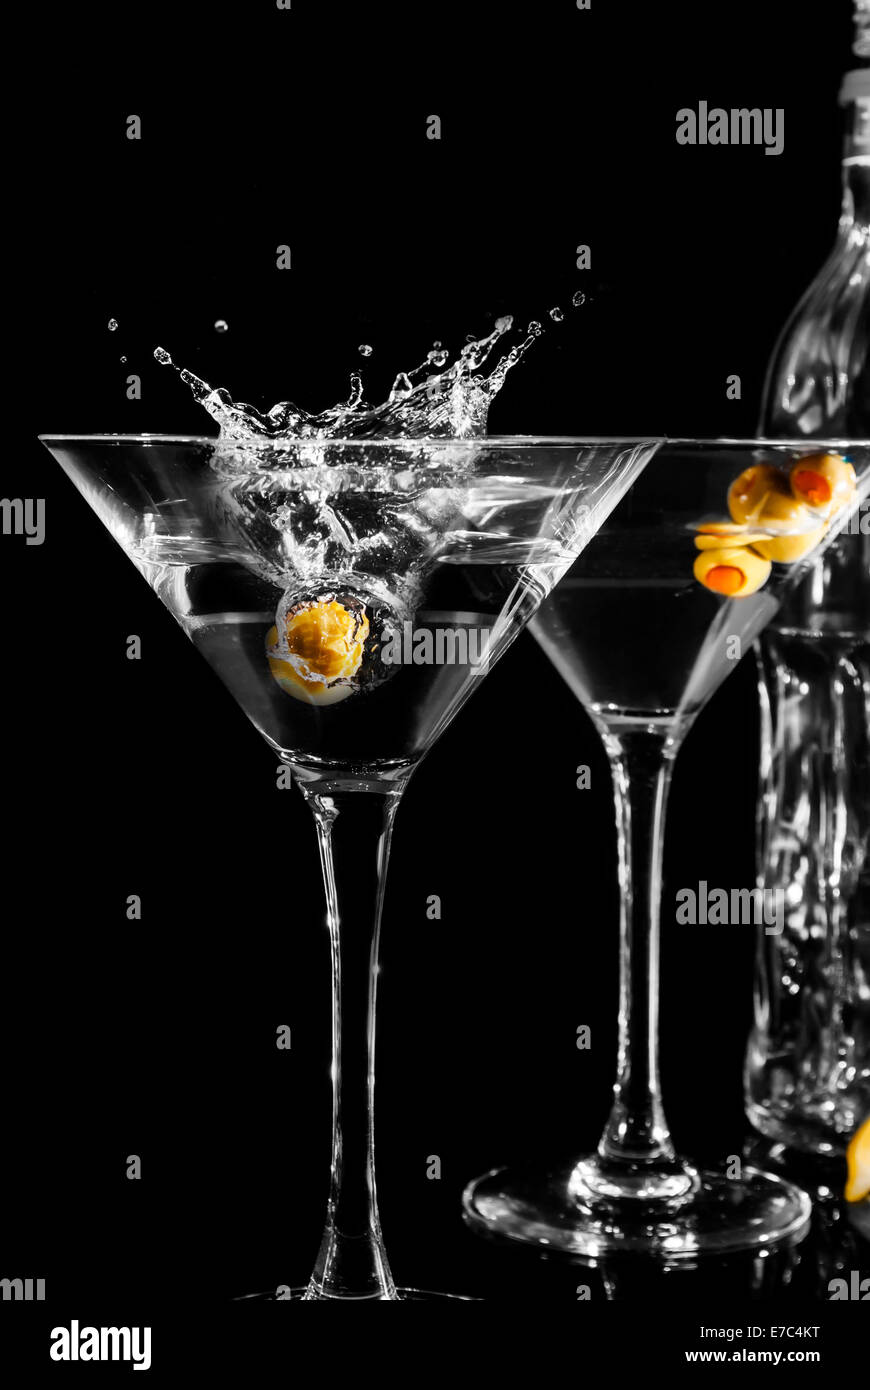 Martini glass with olive on black background Stock Photo